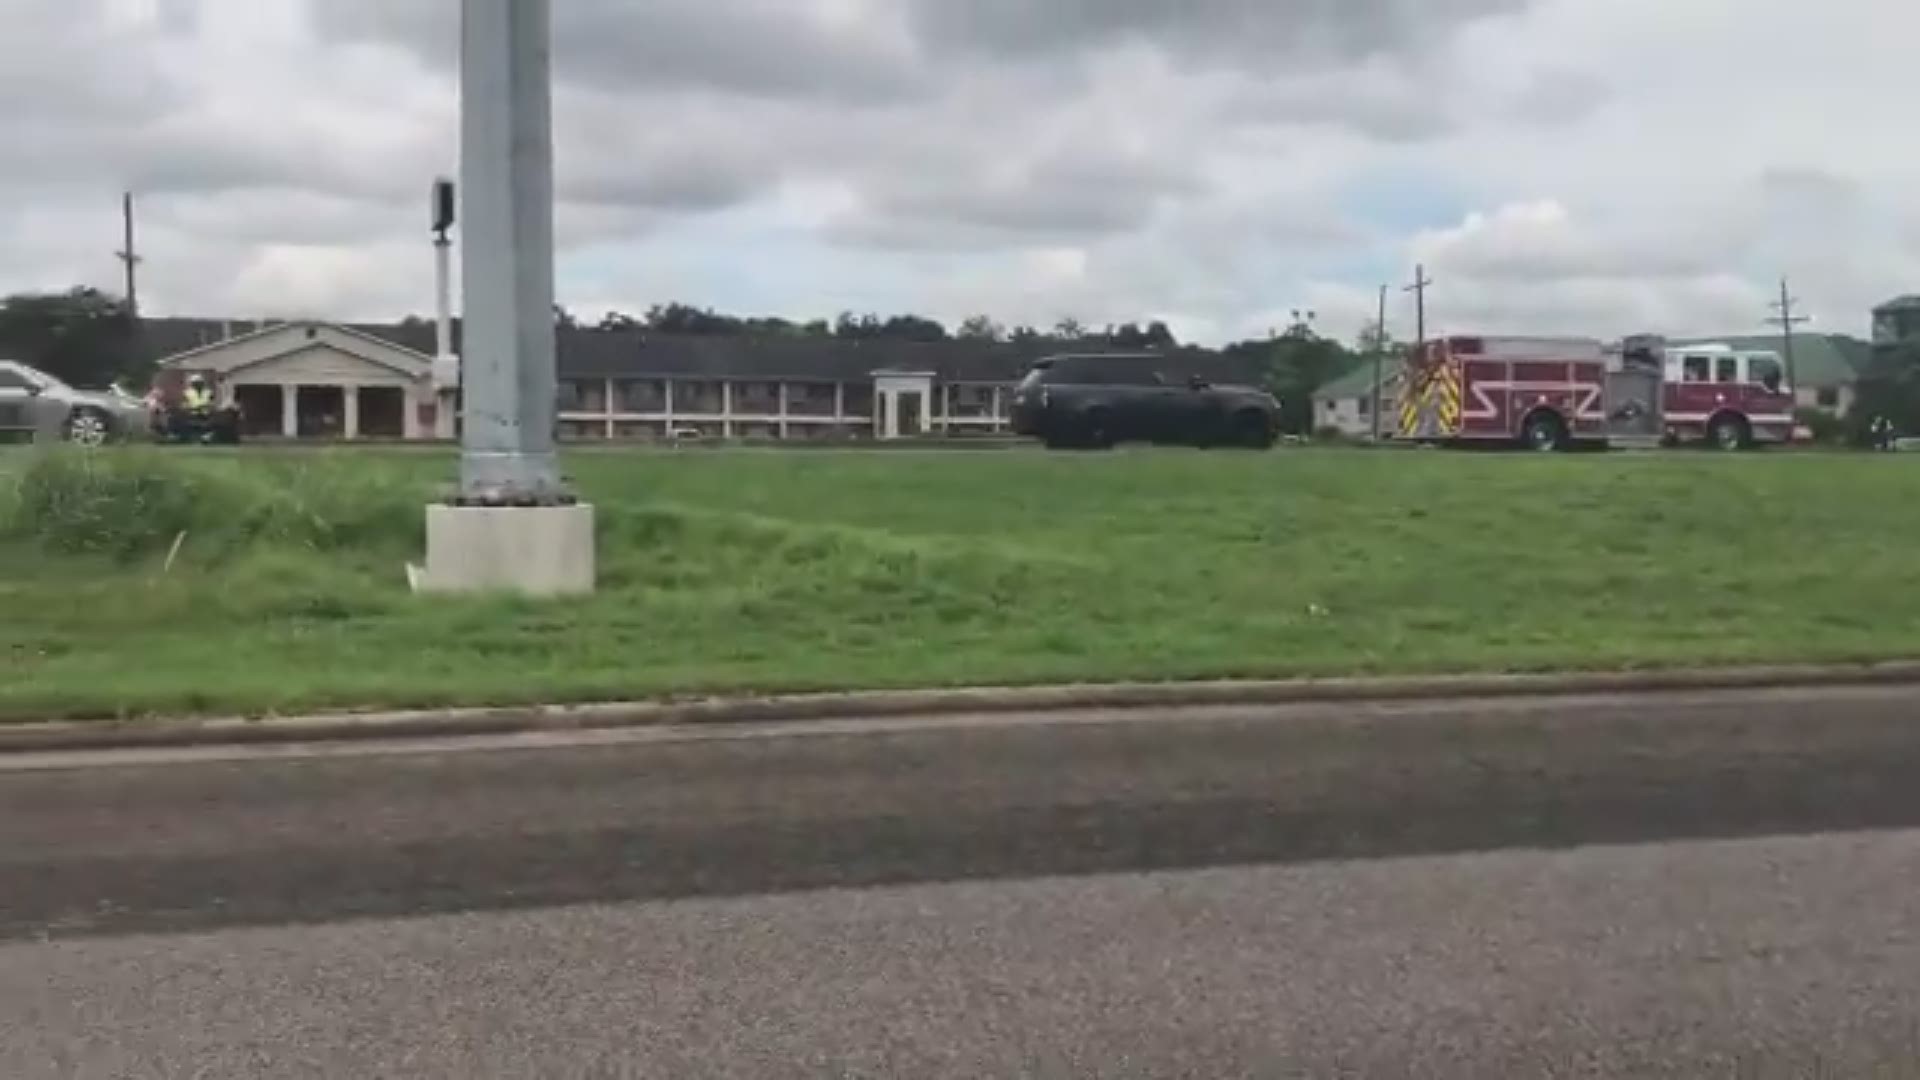 Police say he was trying to cross the interstate near Sam's Club when he was hit